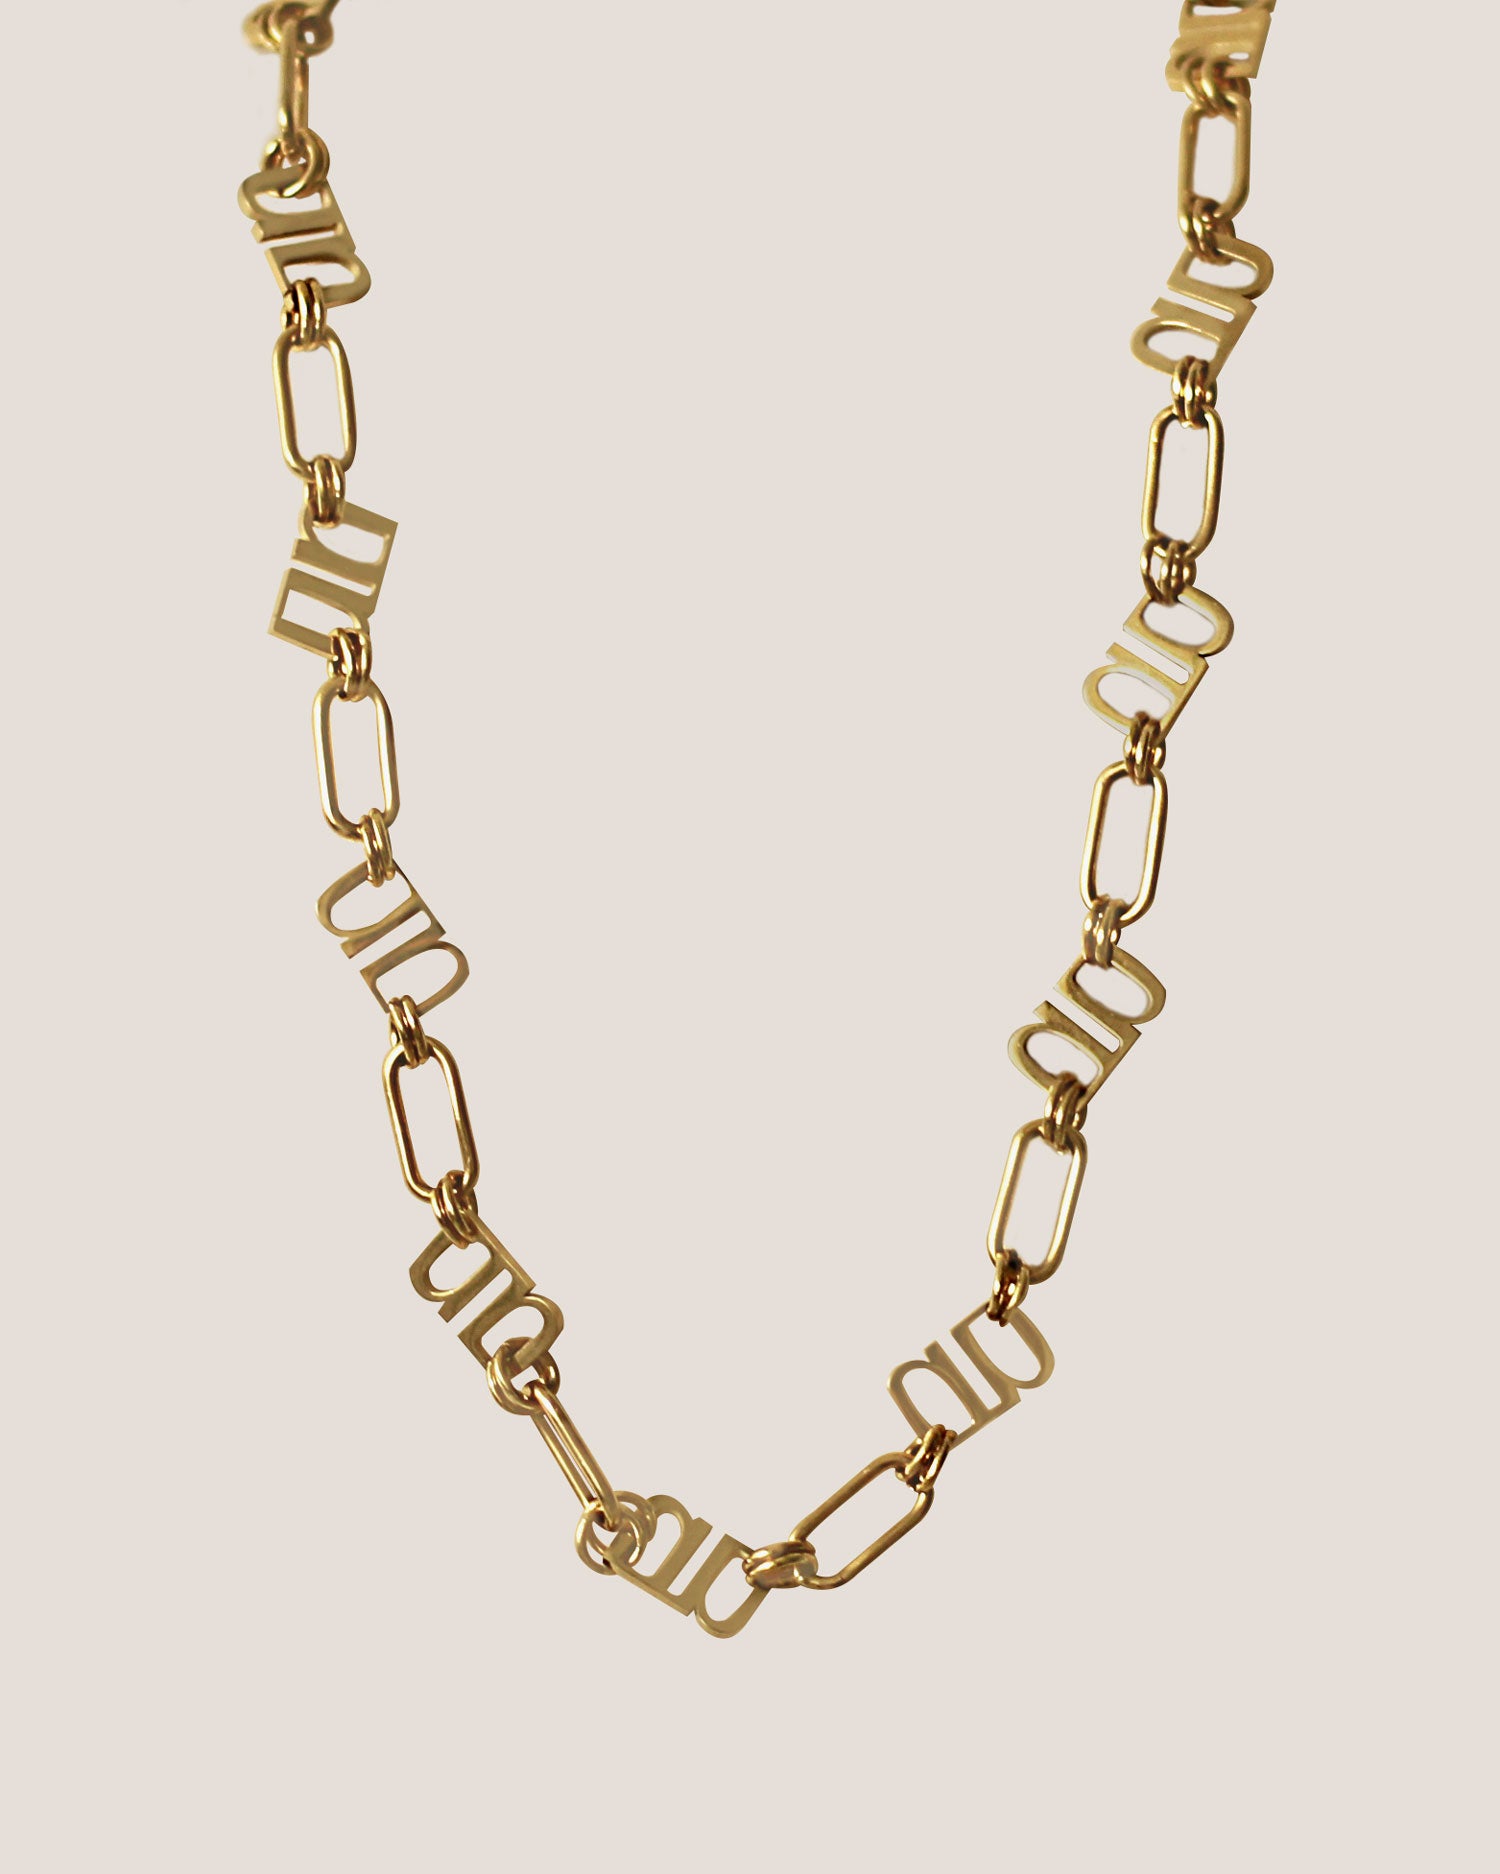 Gung Iconic Gold Chain Necklace